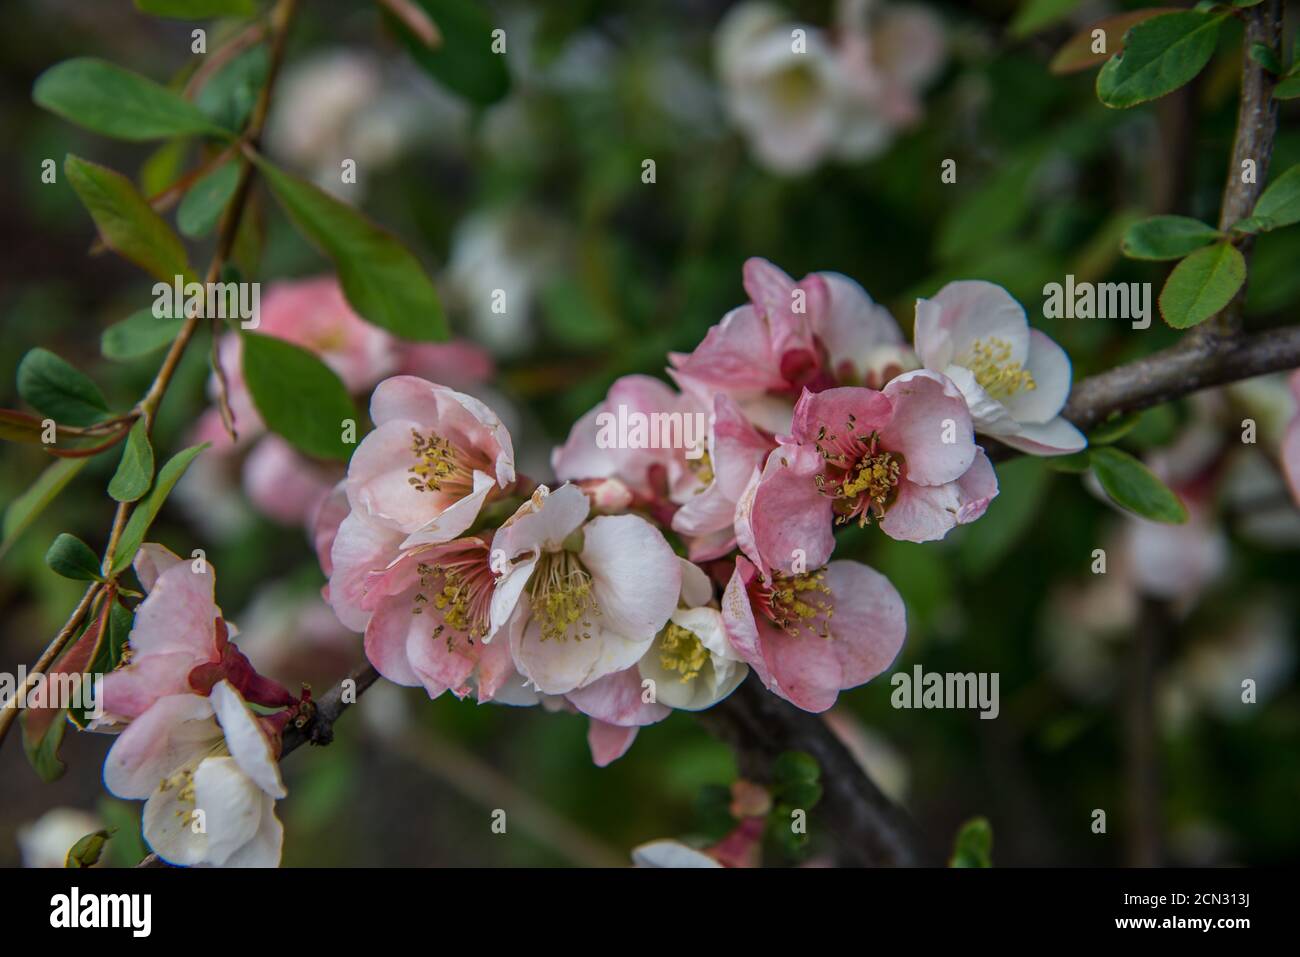 Close up of pink and white flowers blossoming Stock Photo